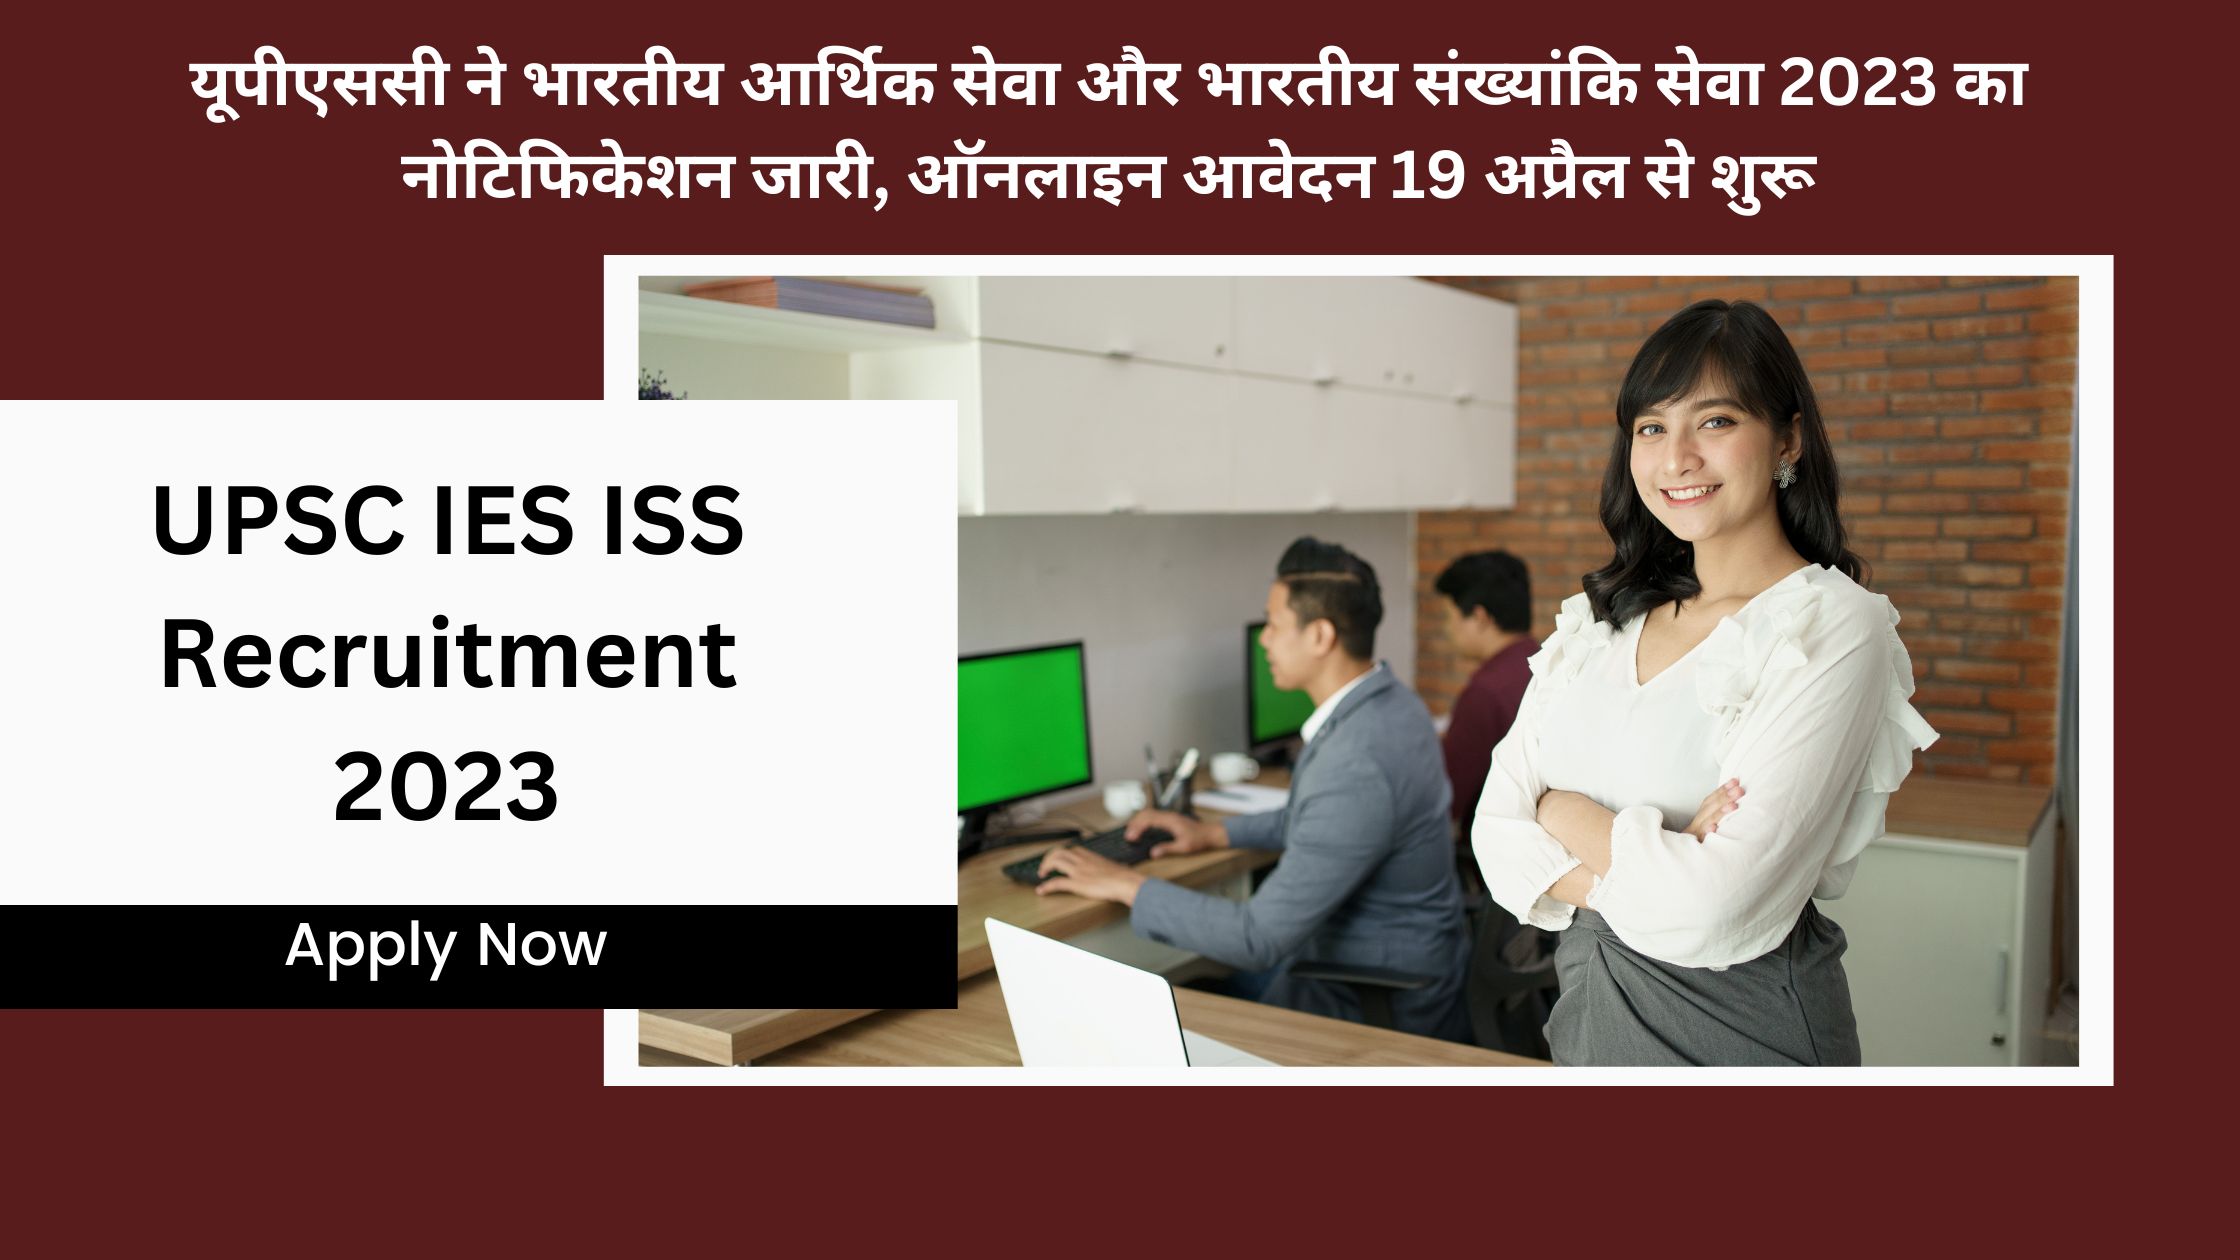 UPSC IES ISS Recruitment 2023 Apply Now